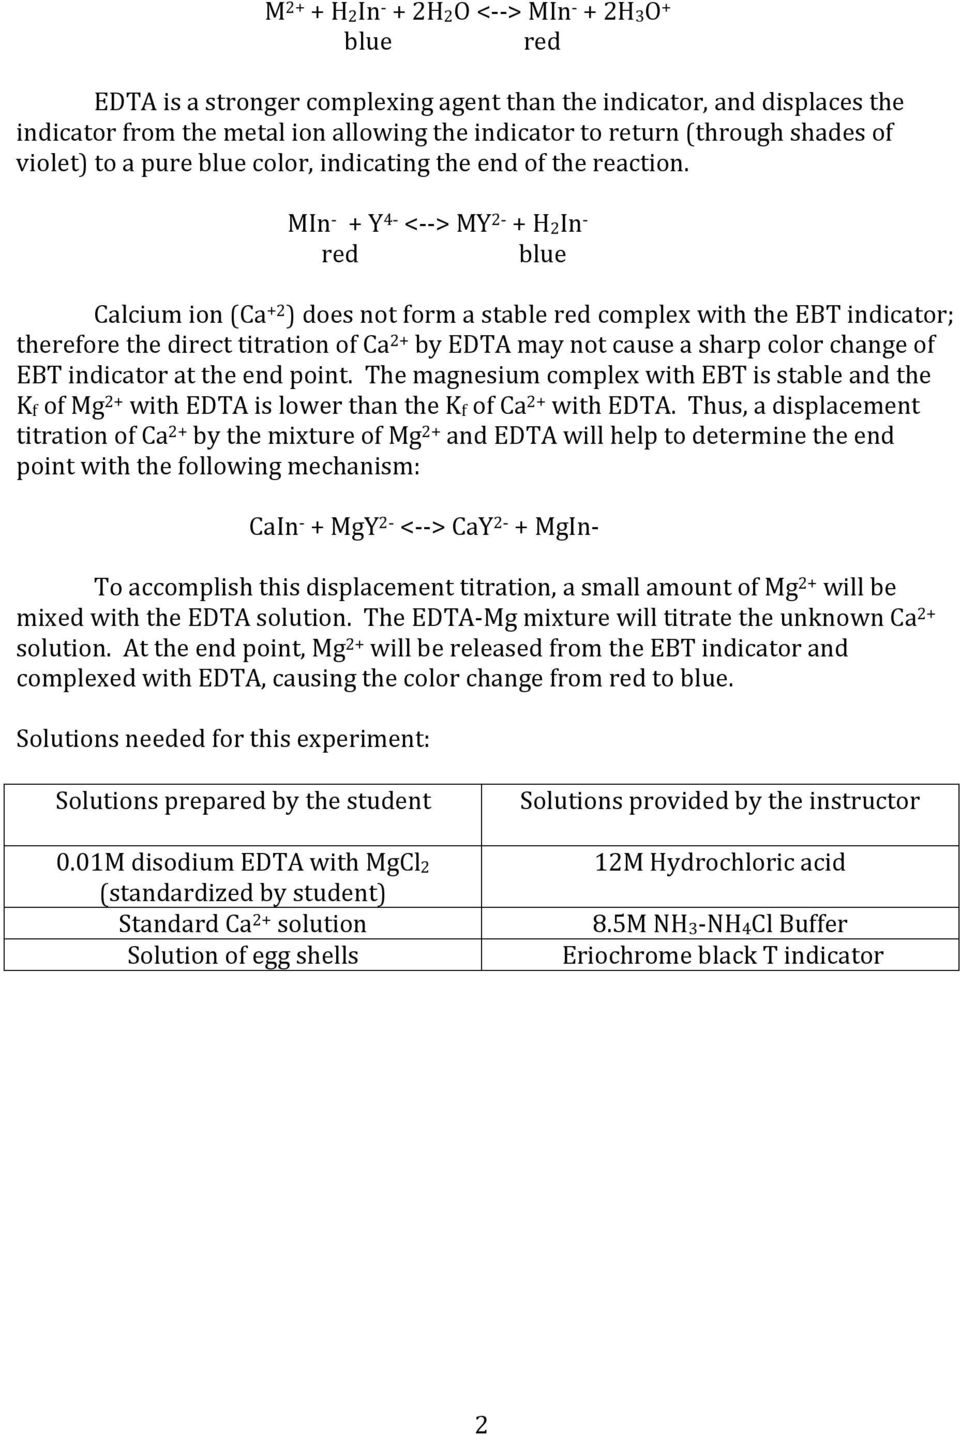 MIn - + Y 4- <- - > MY 2- + H2In - red blue Calcium ion (Ca +2 ) does not form a stable red complex with the EBT indicator; therefore the direct titration of Ca 2+ by EDTA may not cause a sharp color